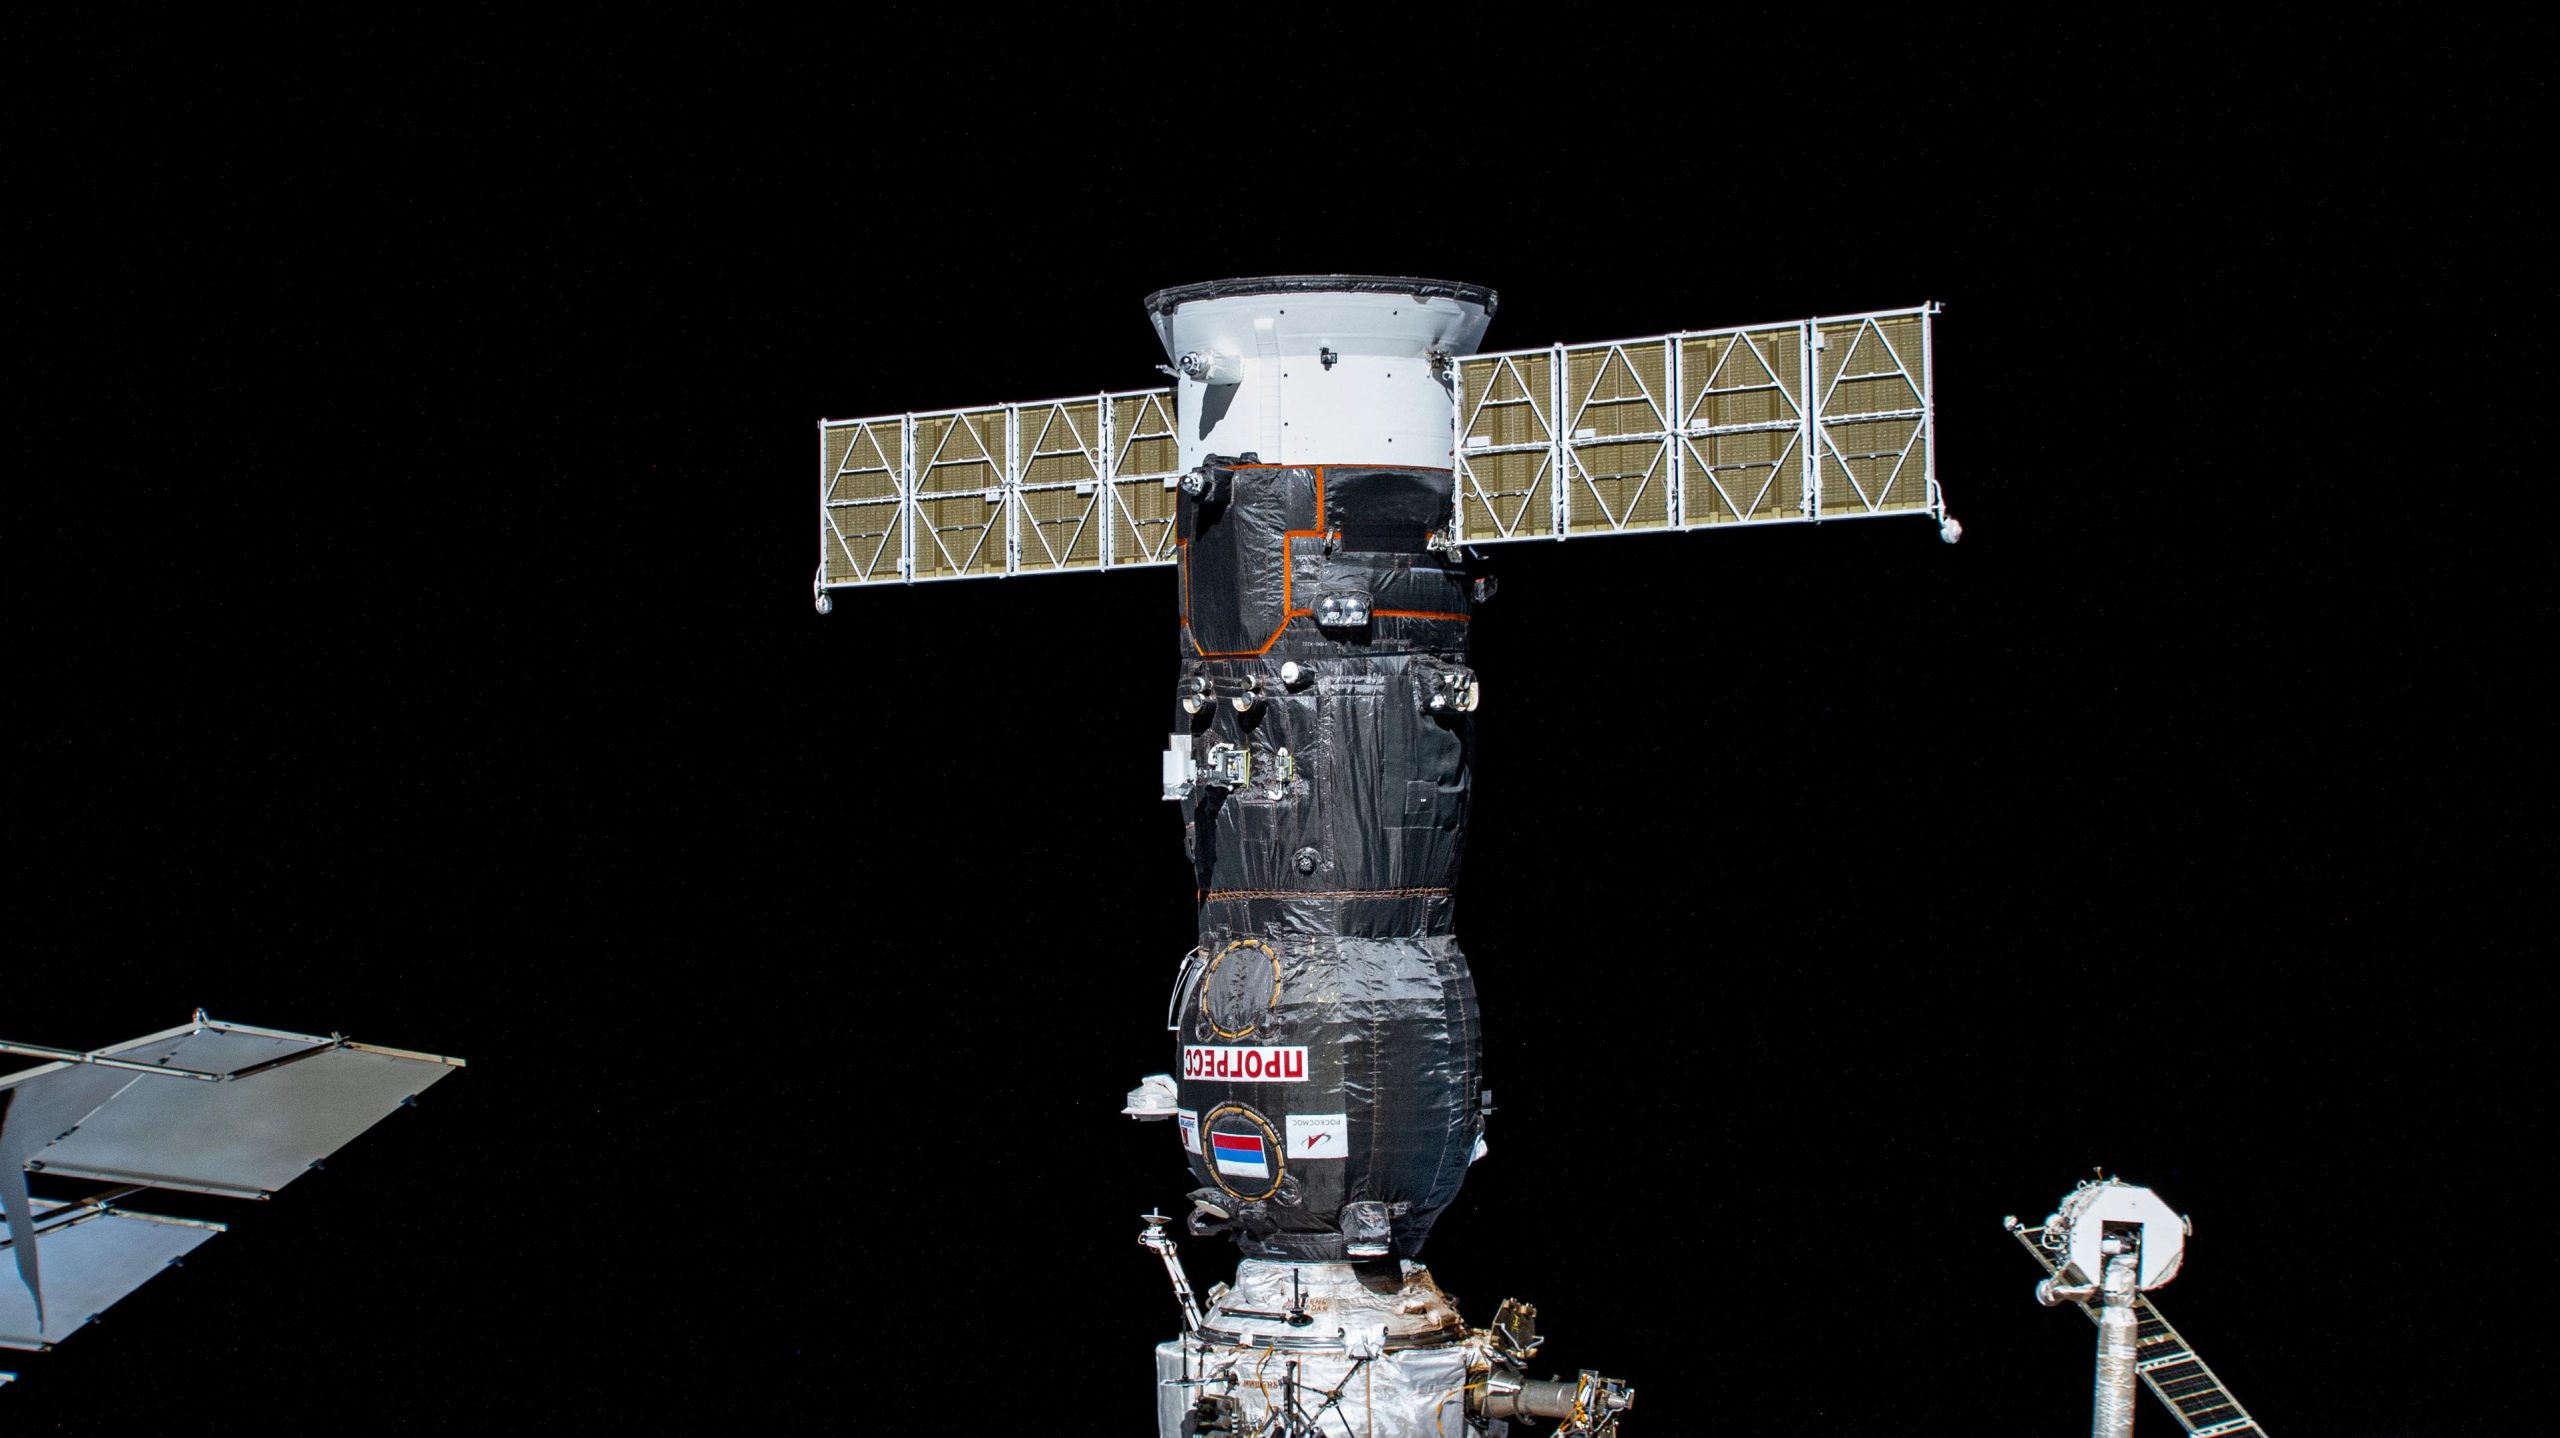 Progress 86’s Critical Cargo Arrives at the International Space Station